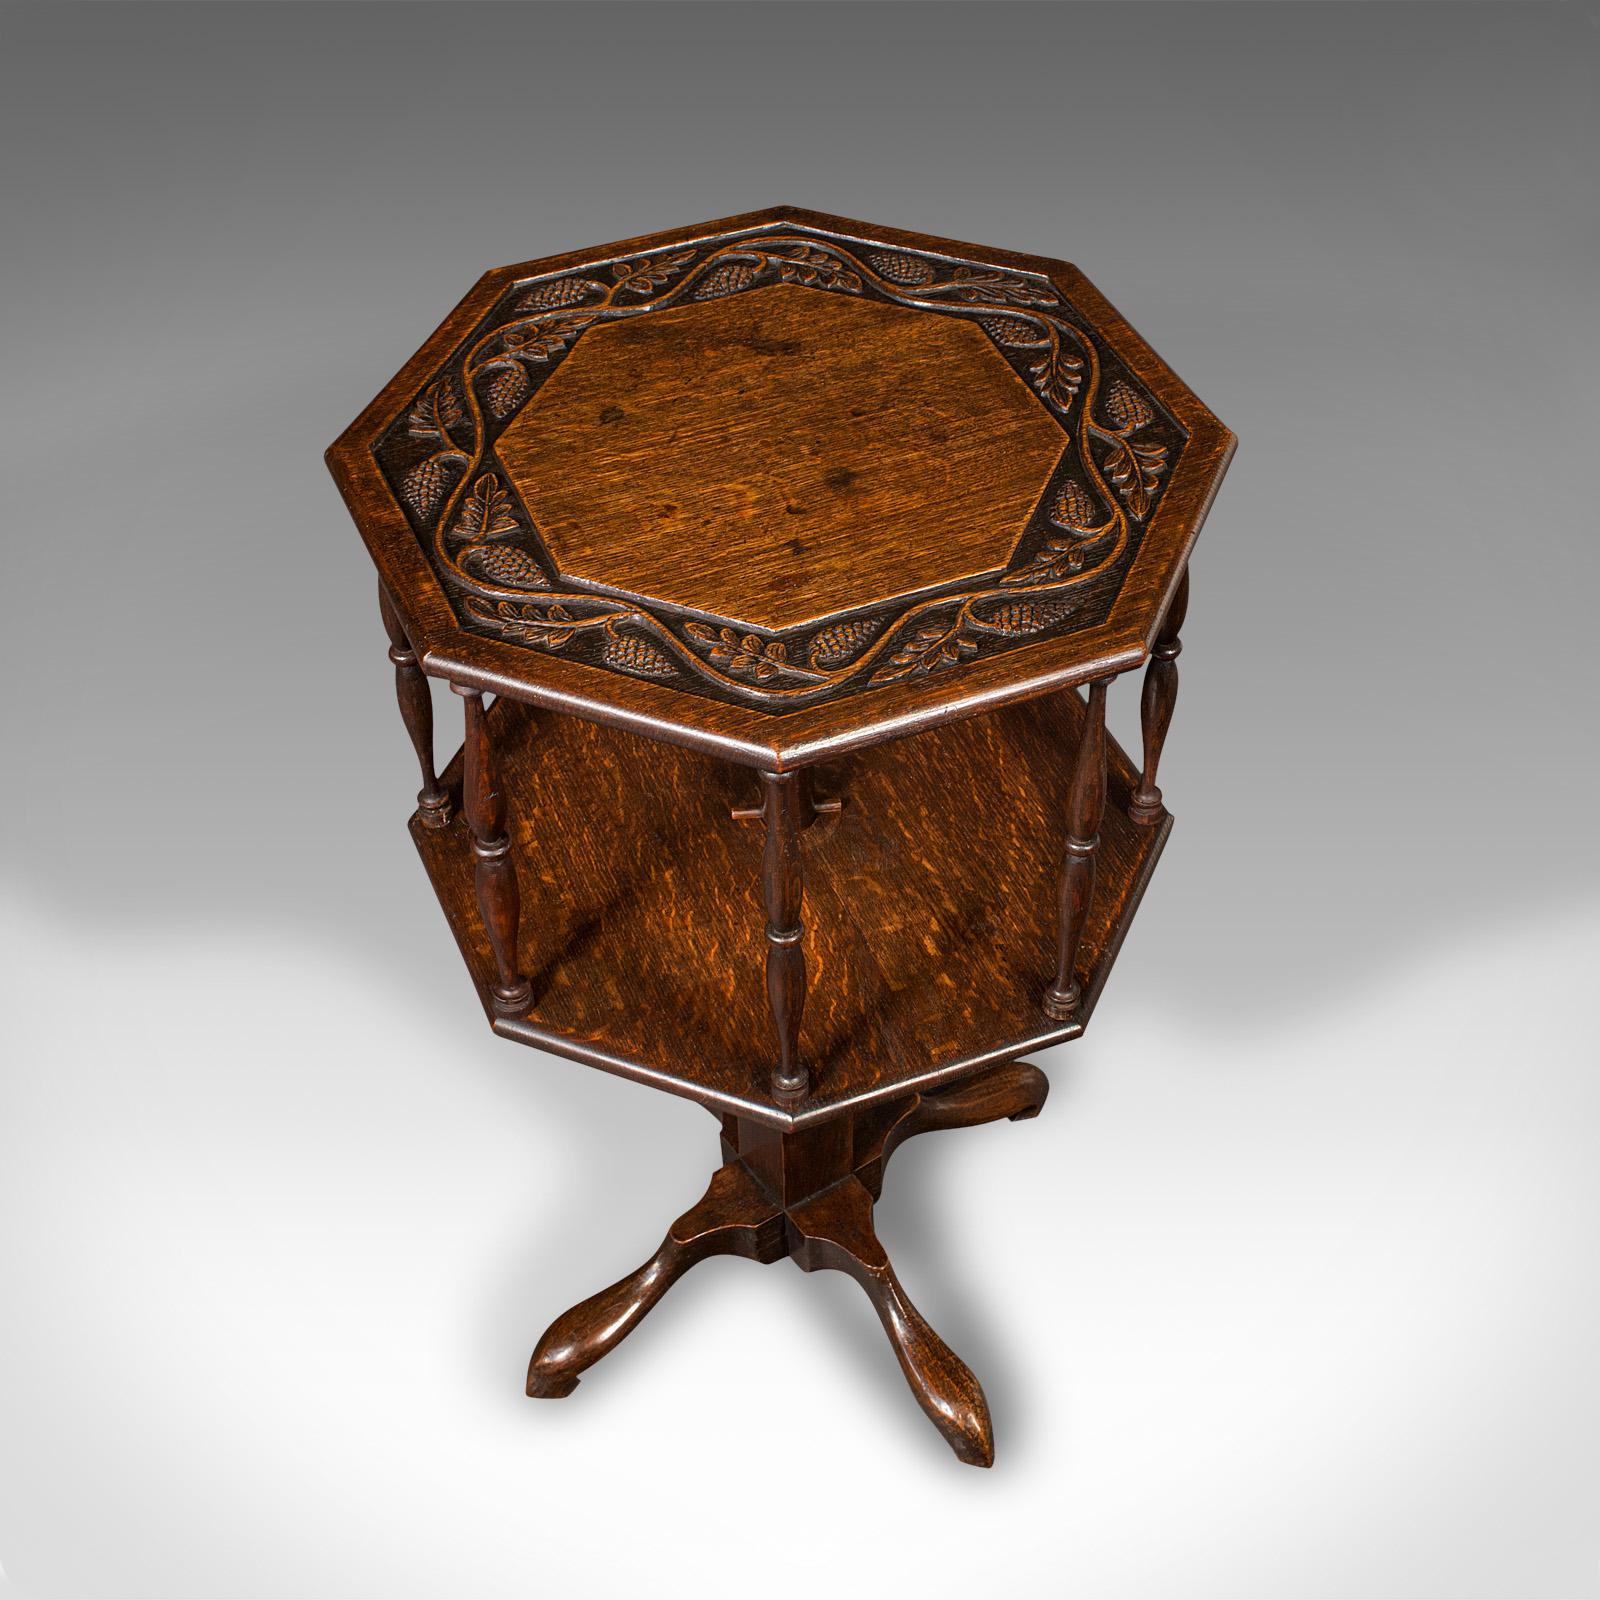 19th Century Antique Octagonal Occasional Table, Oak, Book Shelf, Arts & Crafts, Victorian For Sale